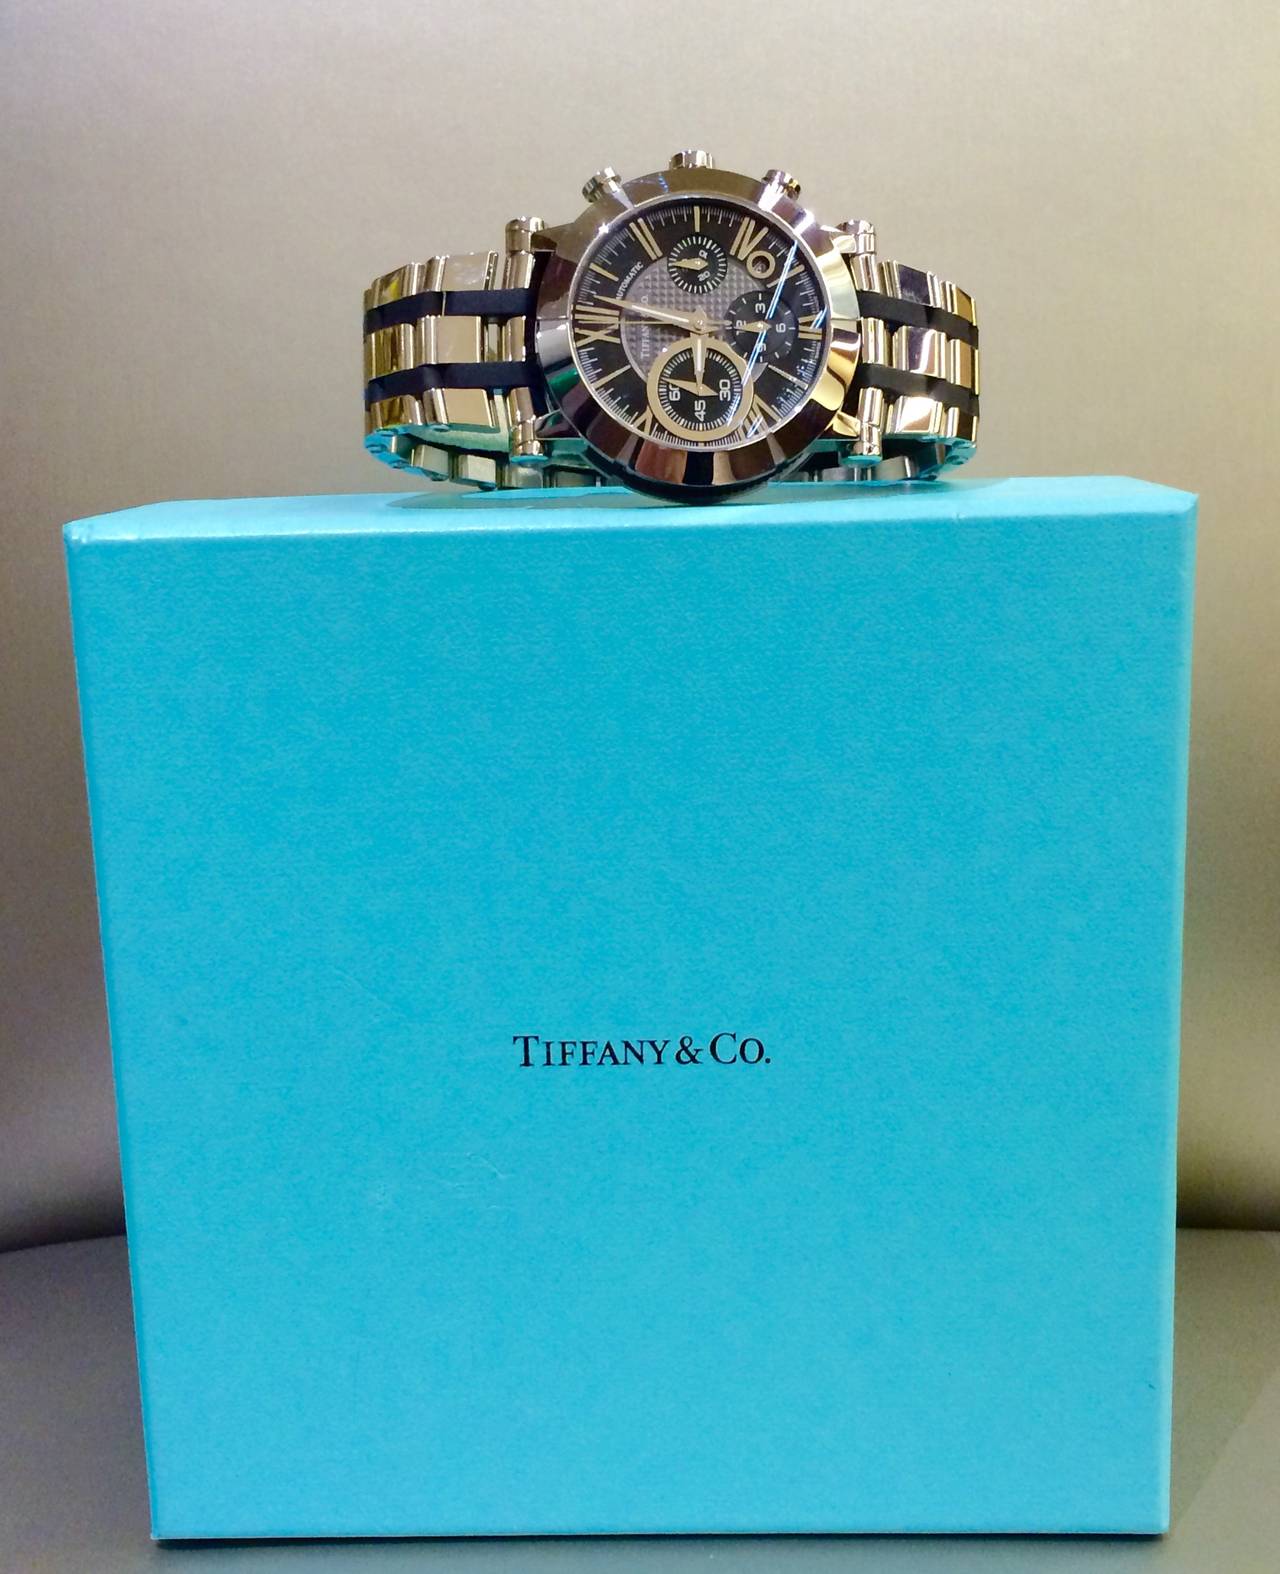 Tiffany & Co. Stainless Steel Rubber Atlas Chronograph Automatic Wristwatch 5